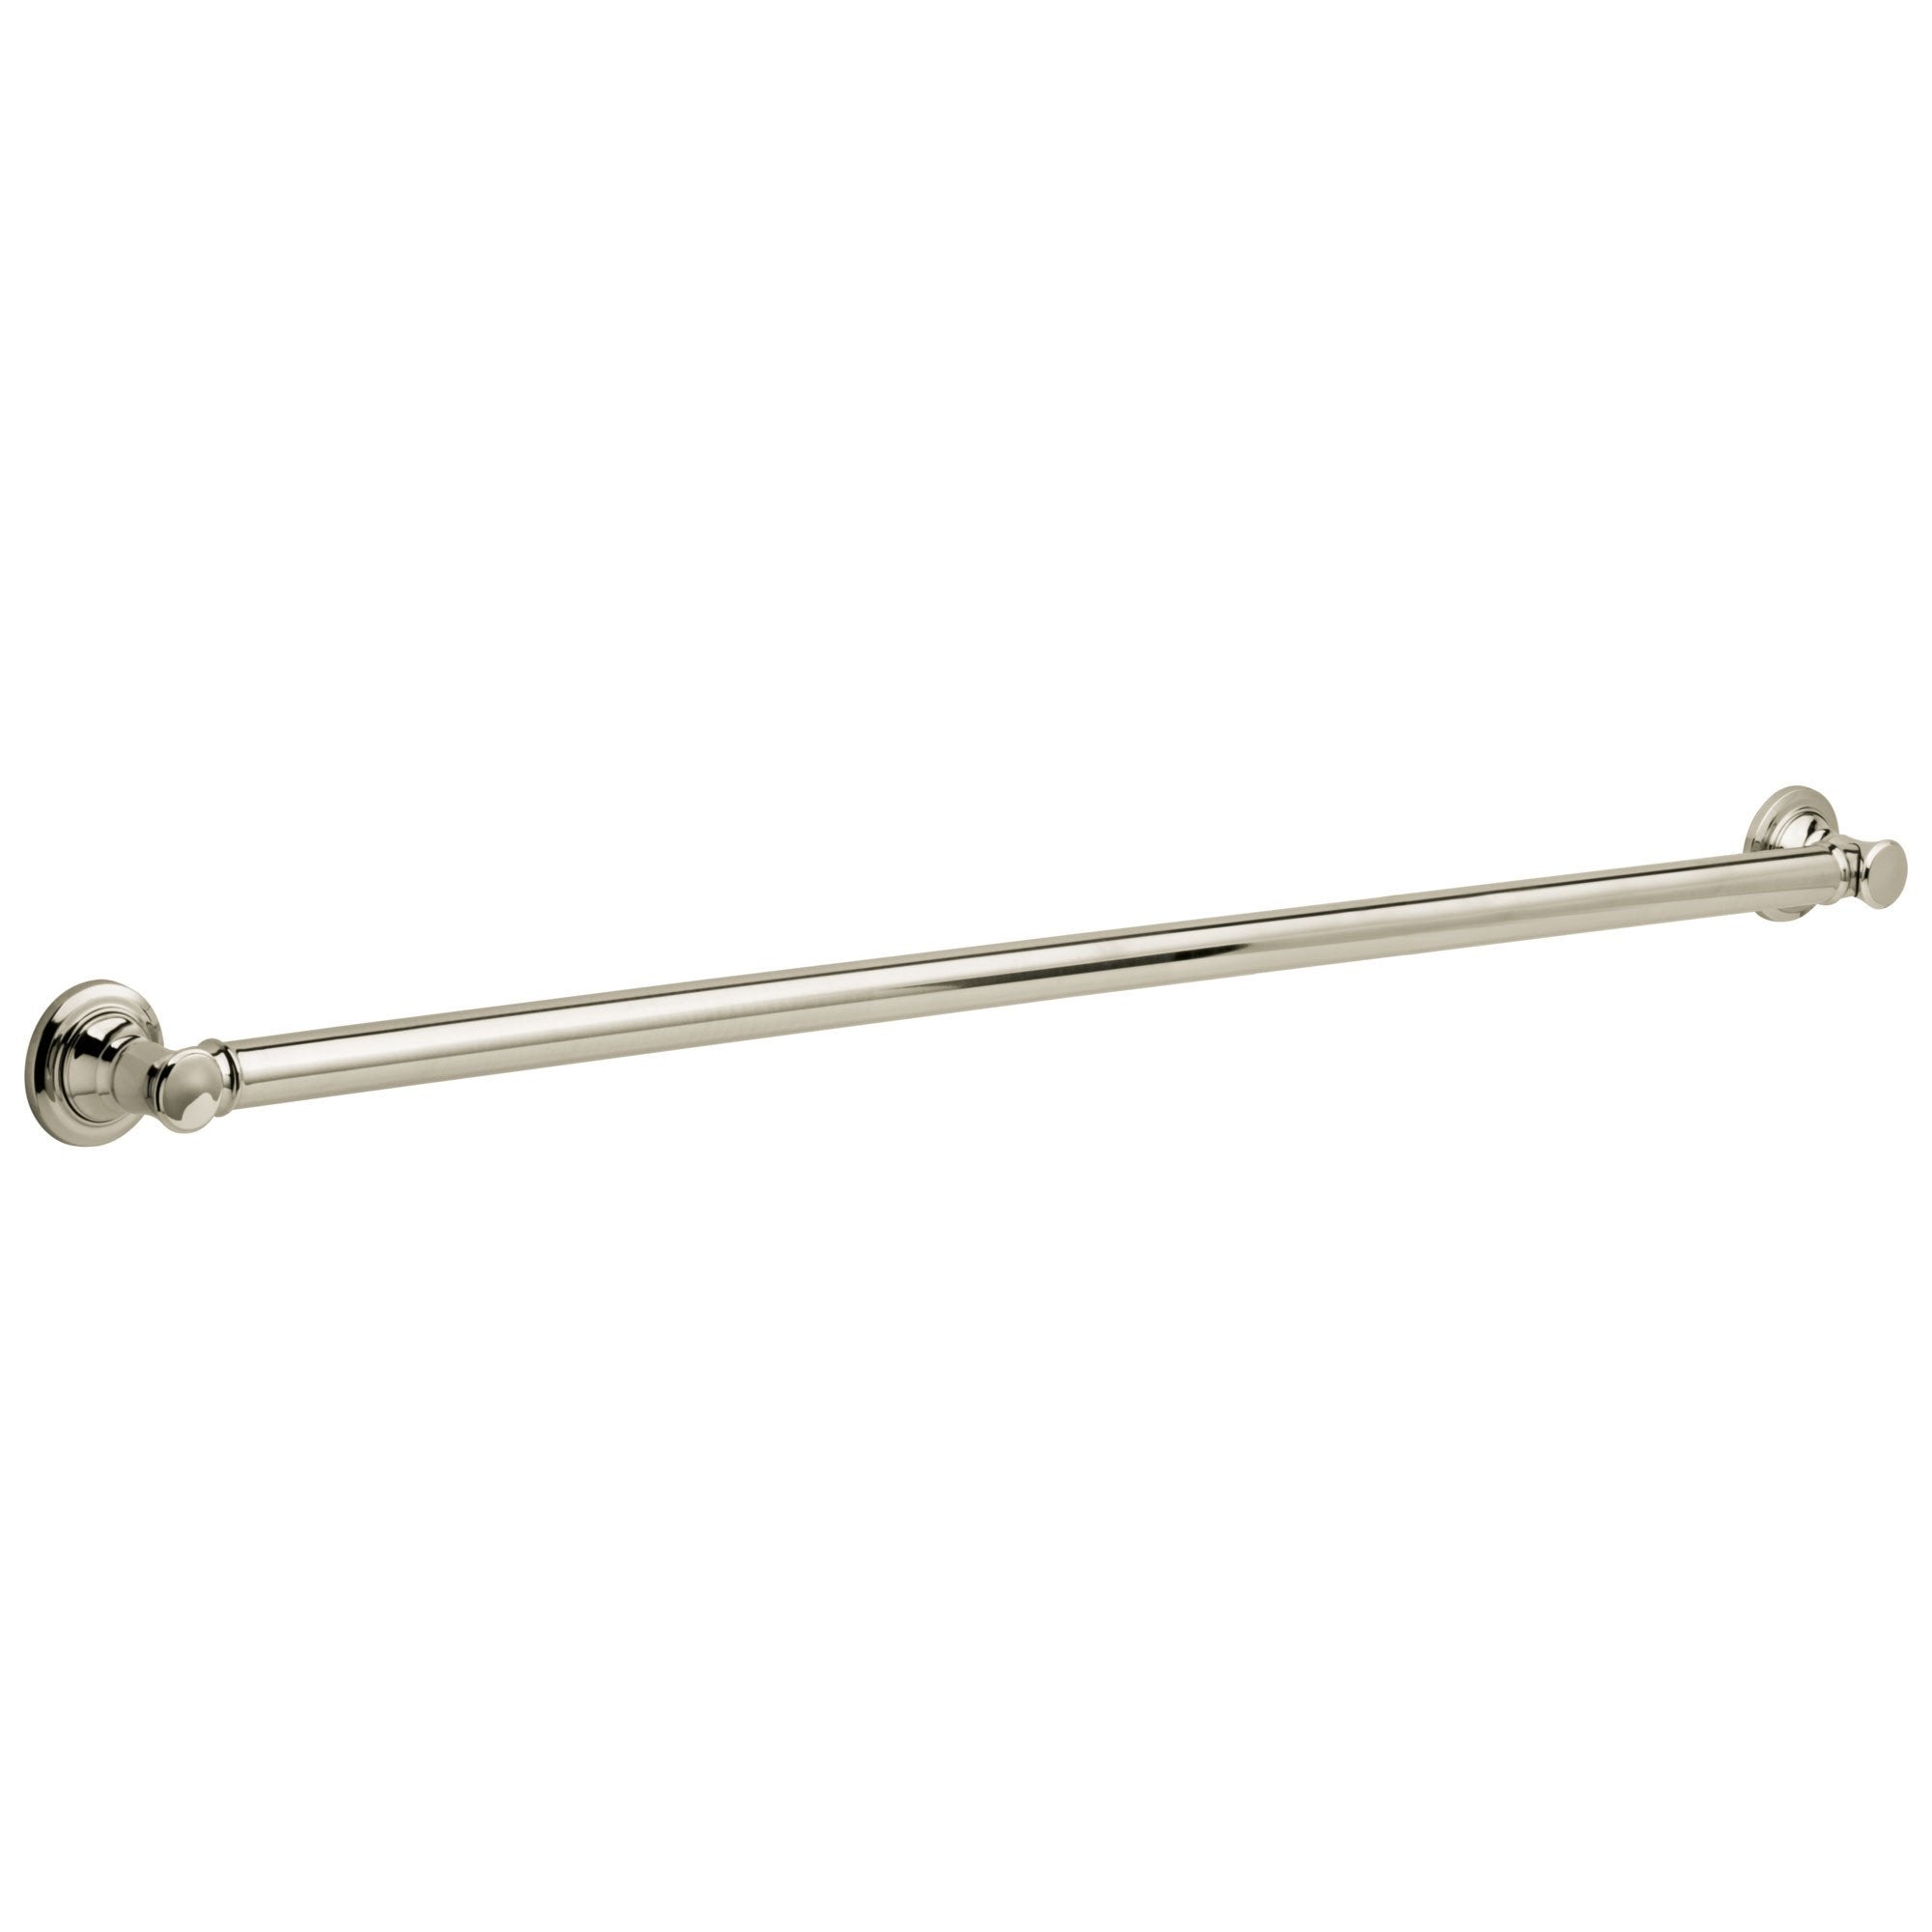 Delta Bath Safety Collection Polished Nickel Finish Traditional Style Decorative ADA Grab Bar / Towel Bar for Shower or Bathroom - 42" D41642PN